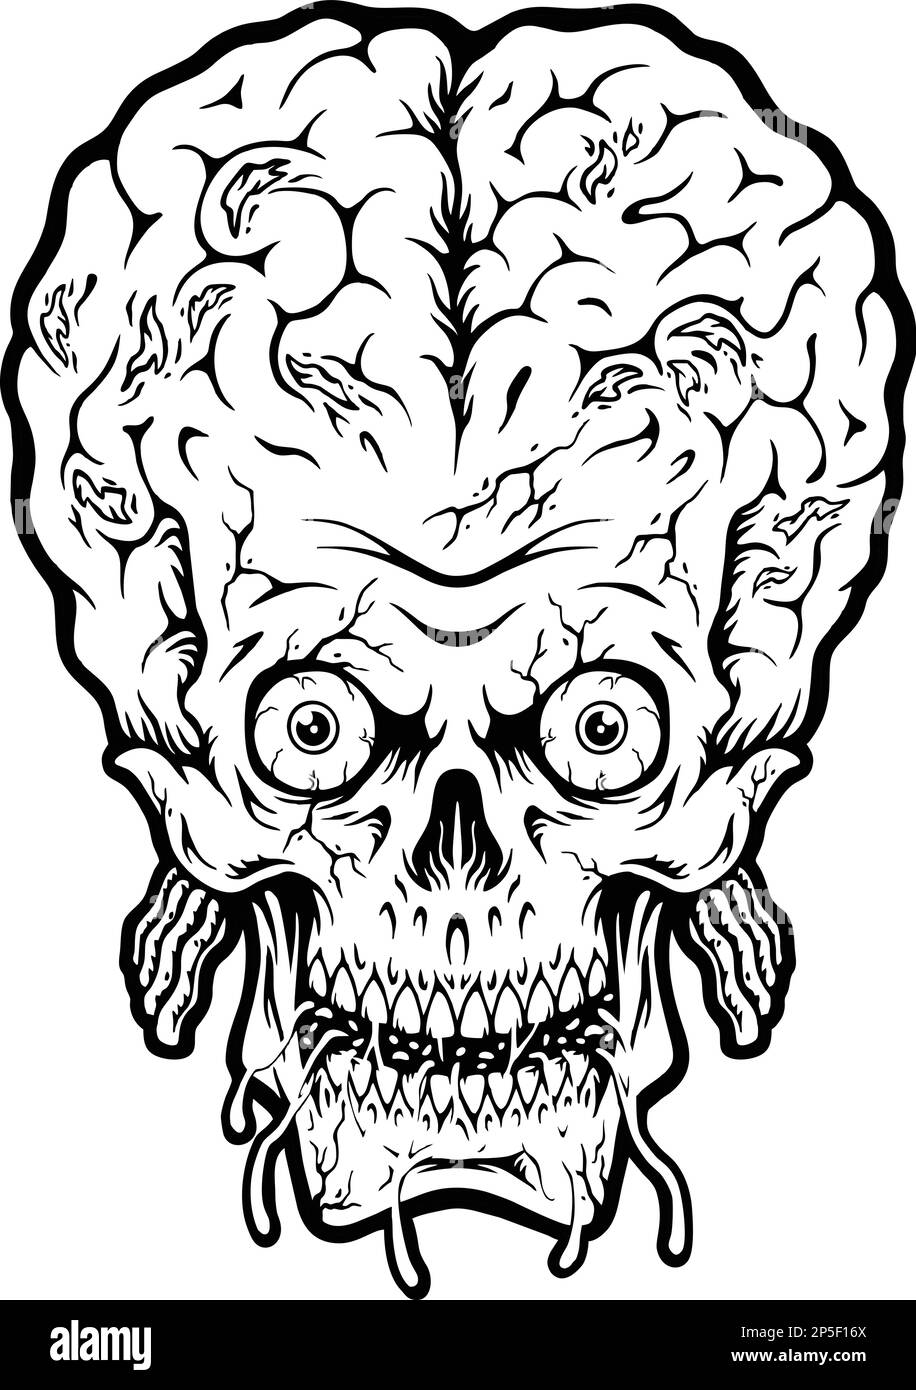 https://c8.alamy.com/comp/2P5F16X/monster-zombie-head-skull-brain-black-and-white-vector-illustrations-for-your-work-logo-merchandise-t-shirt-stickers-and-label-designs-poster-gree-2P5F16X.jpg